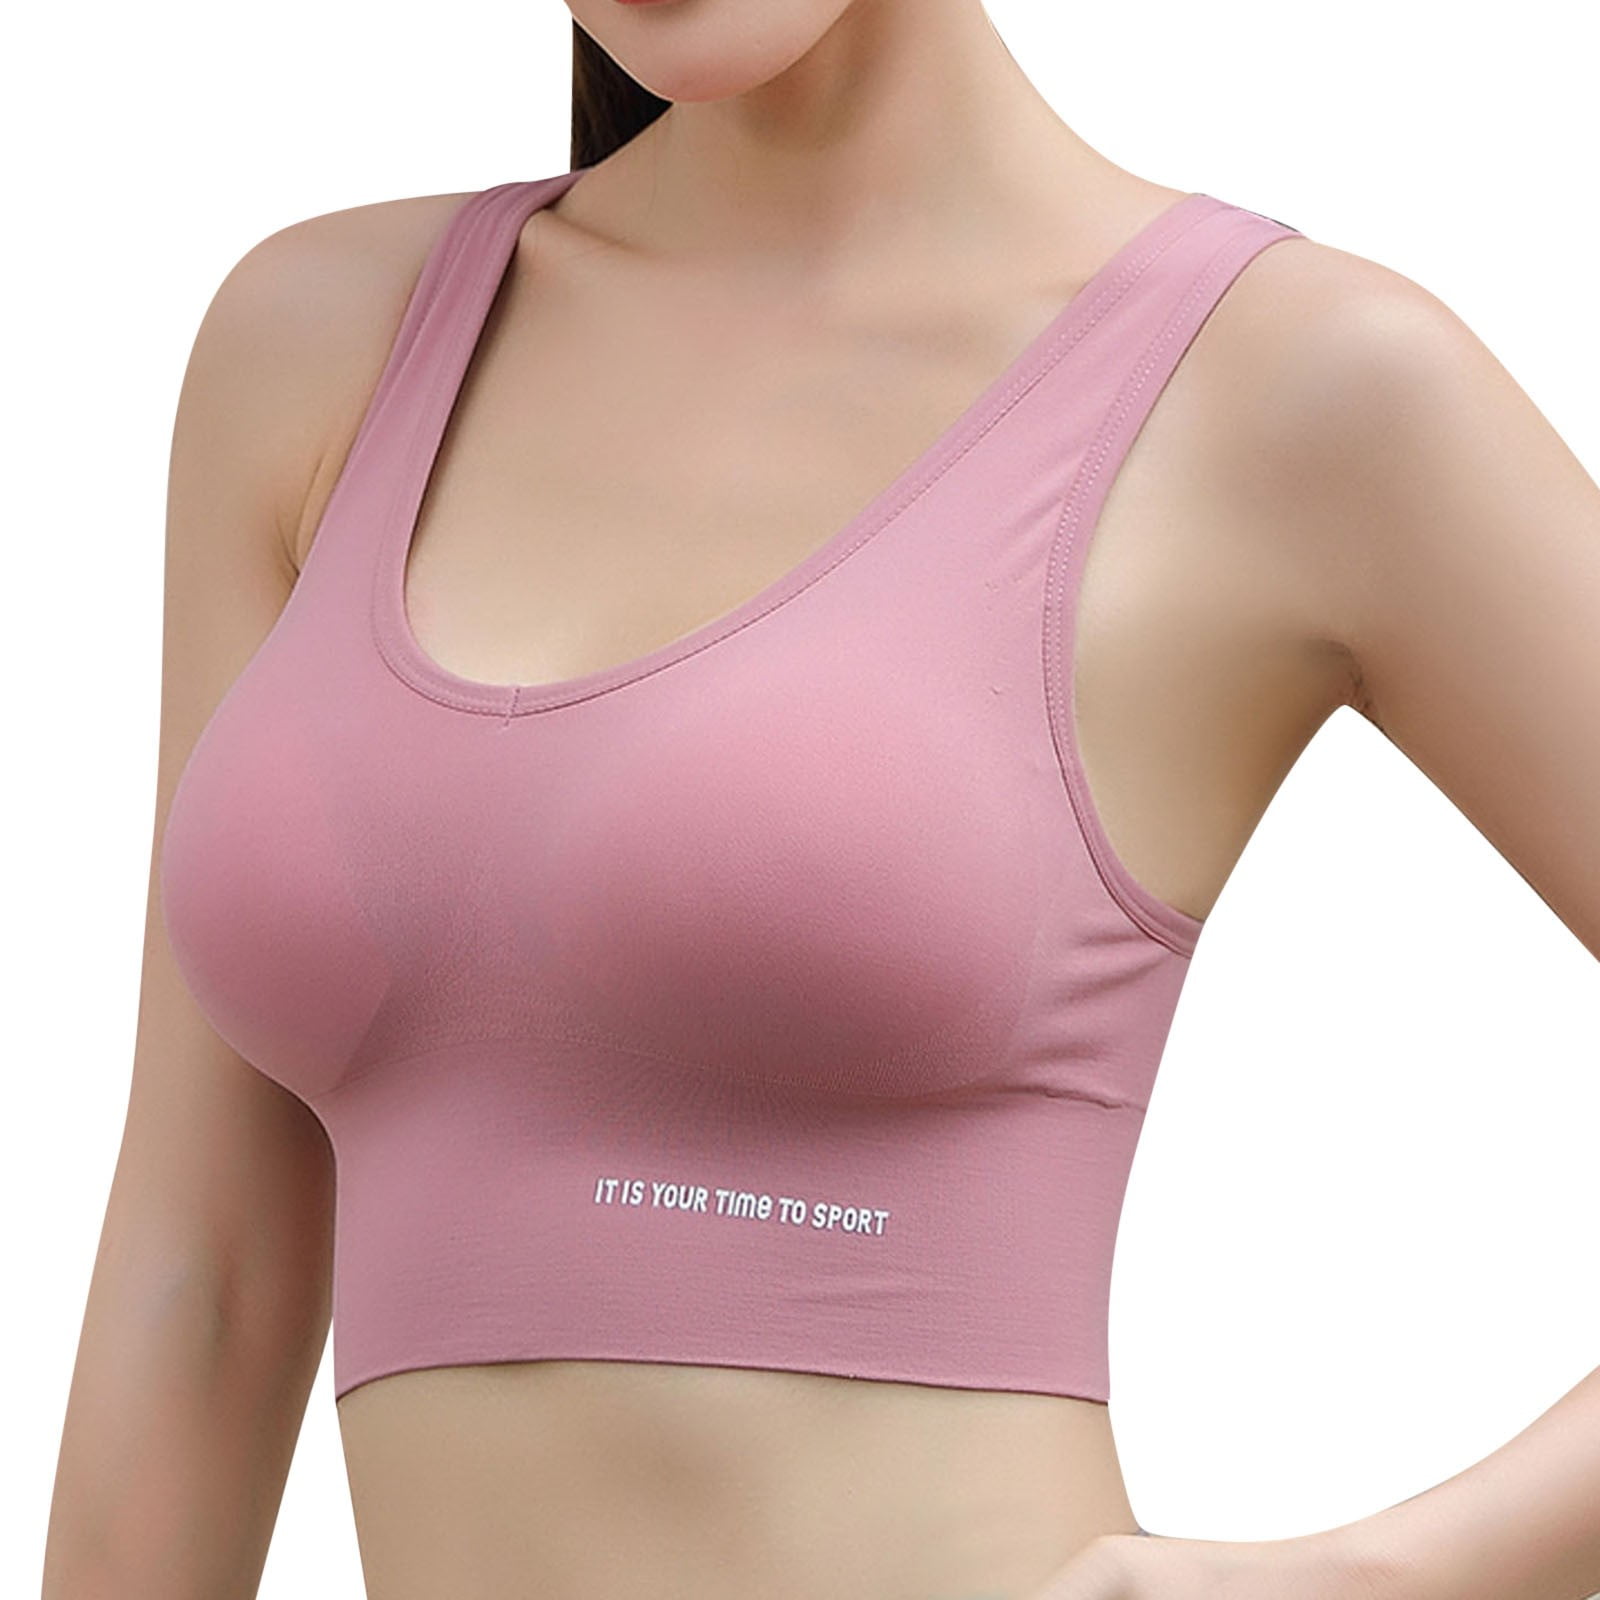 Shpwfbe Sports Bra Bras for Women 3 Pieces Womens Sports Bra No Wire  Comfort Sleep Bra Plus Size Workout Activity Bras With Non Removable Pads  Shaping